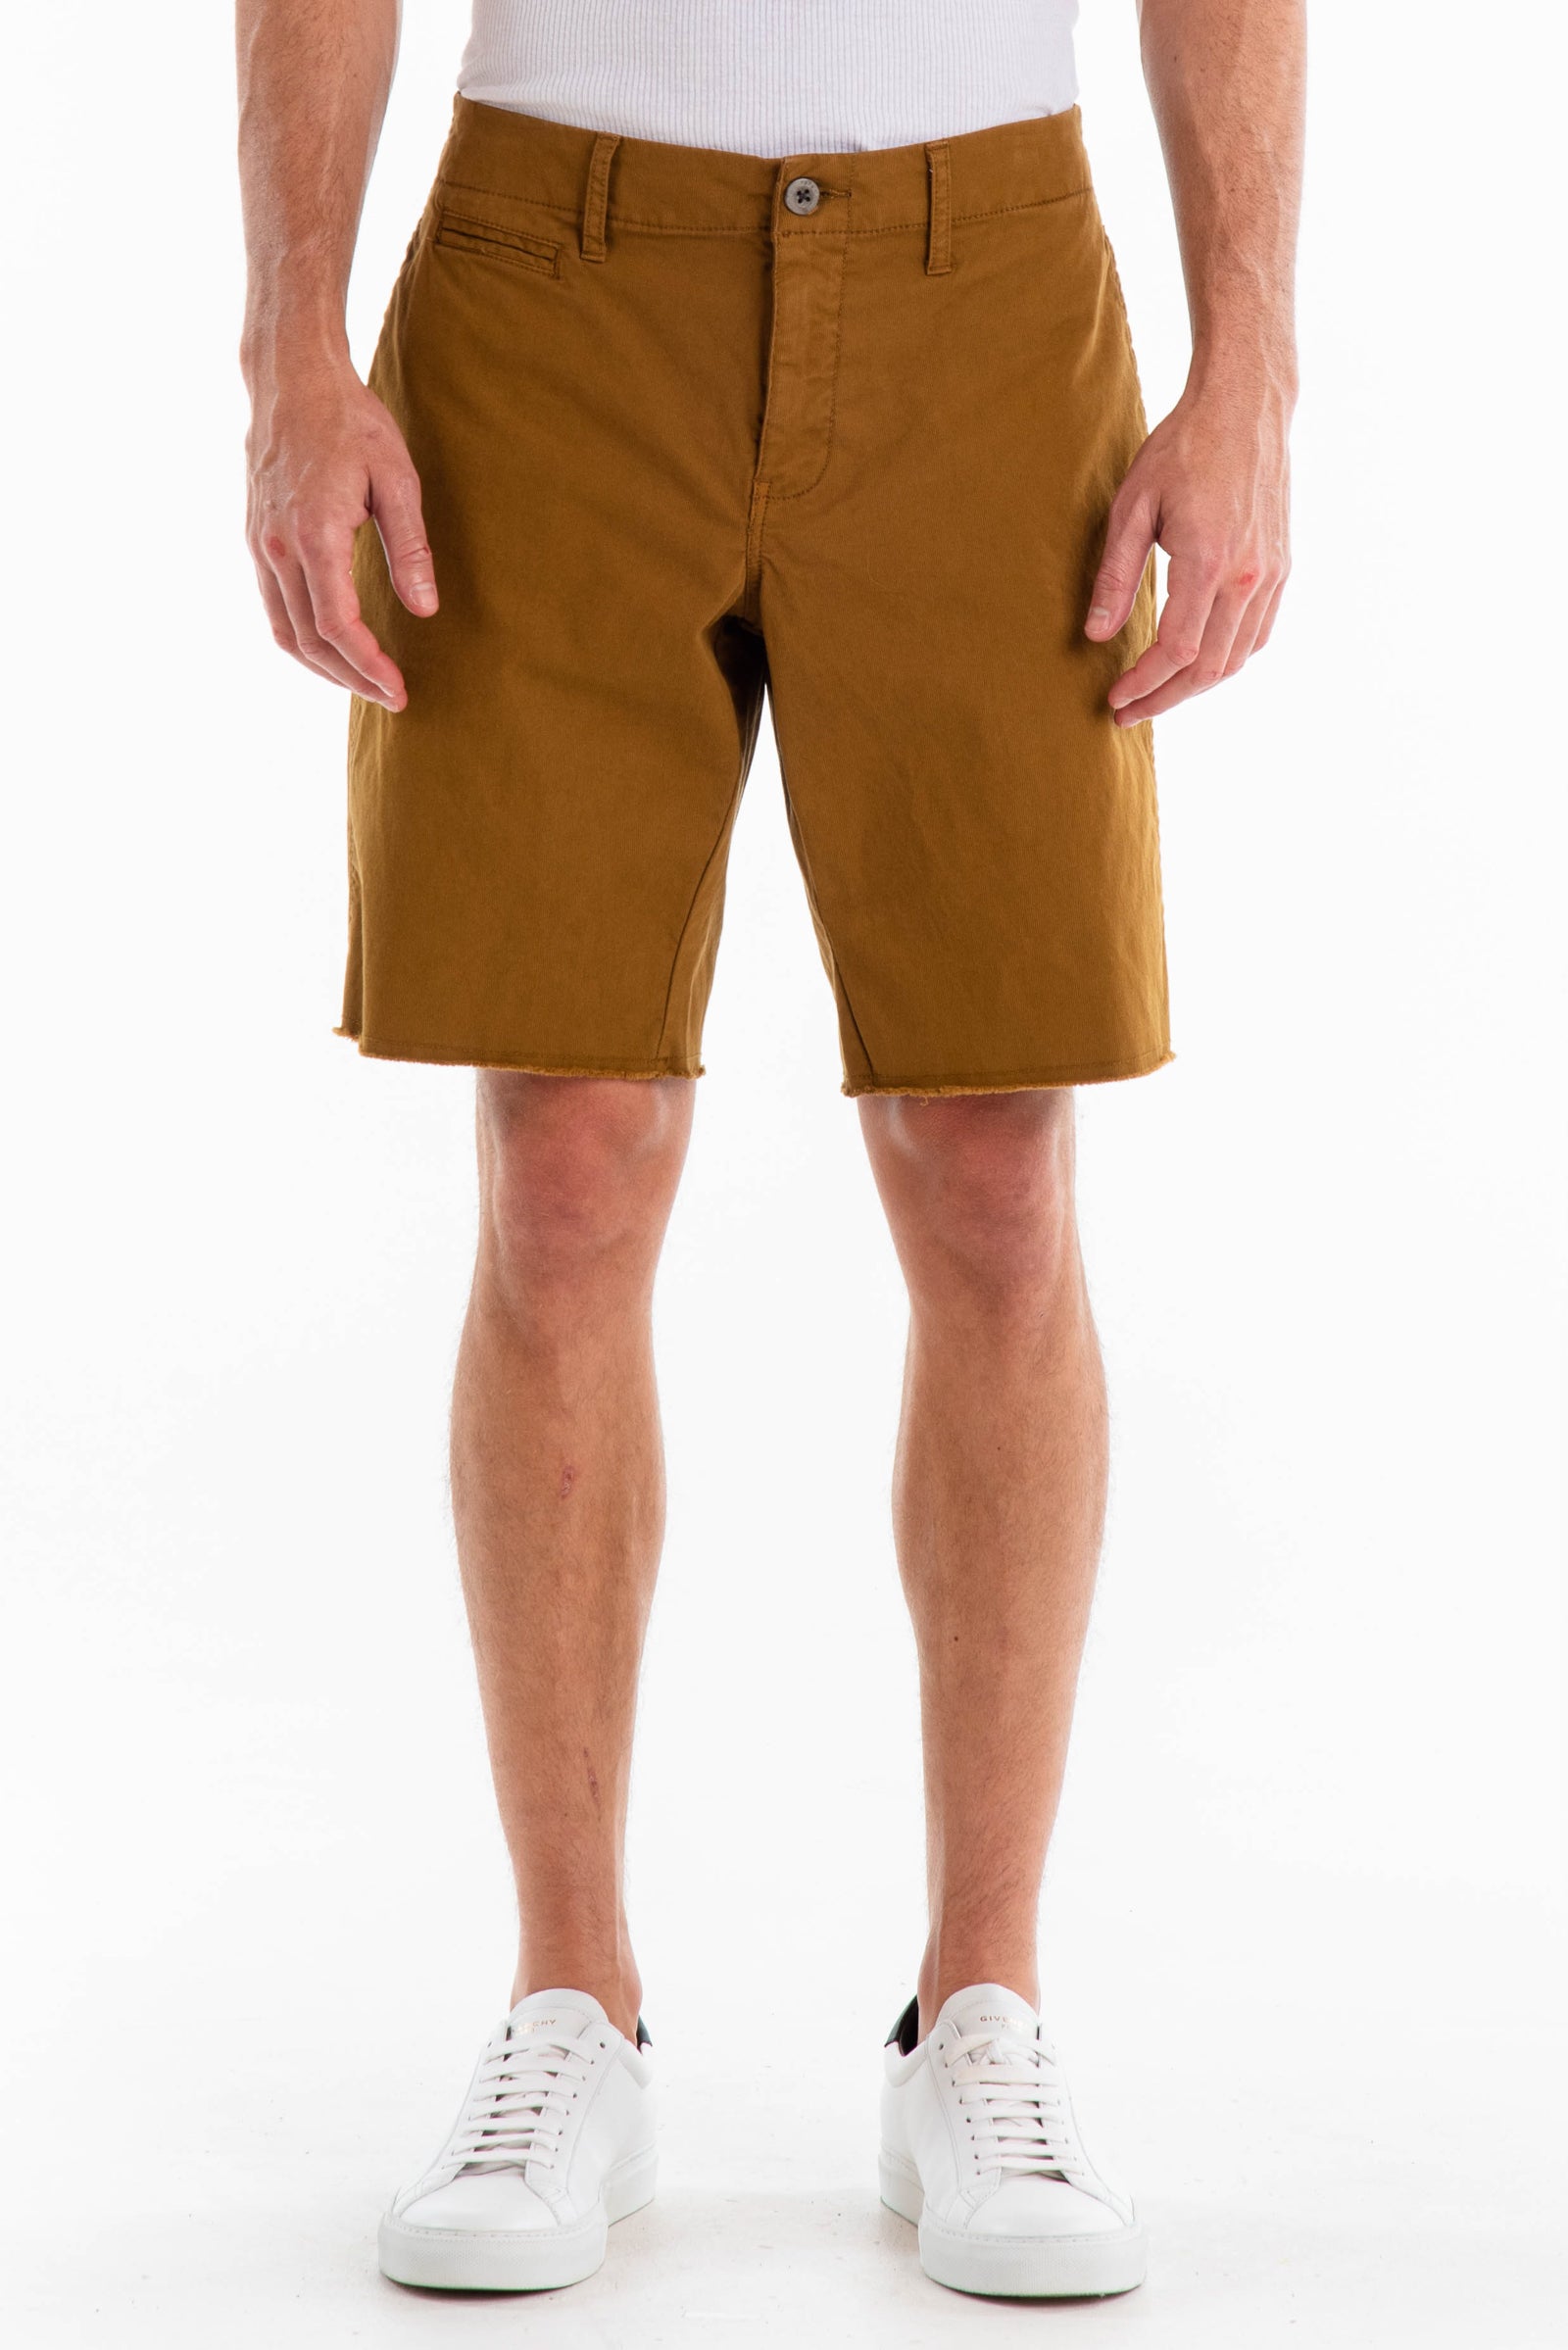 Original Paperbacks Rockland Chino Short in Ochre on Model Cropped Front View